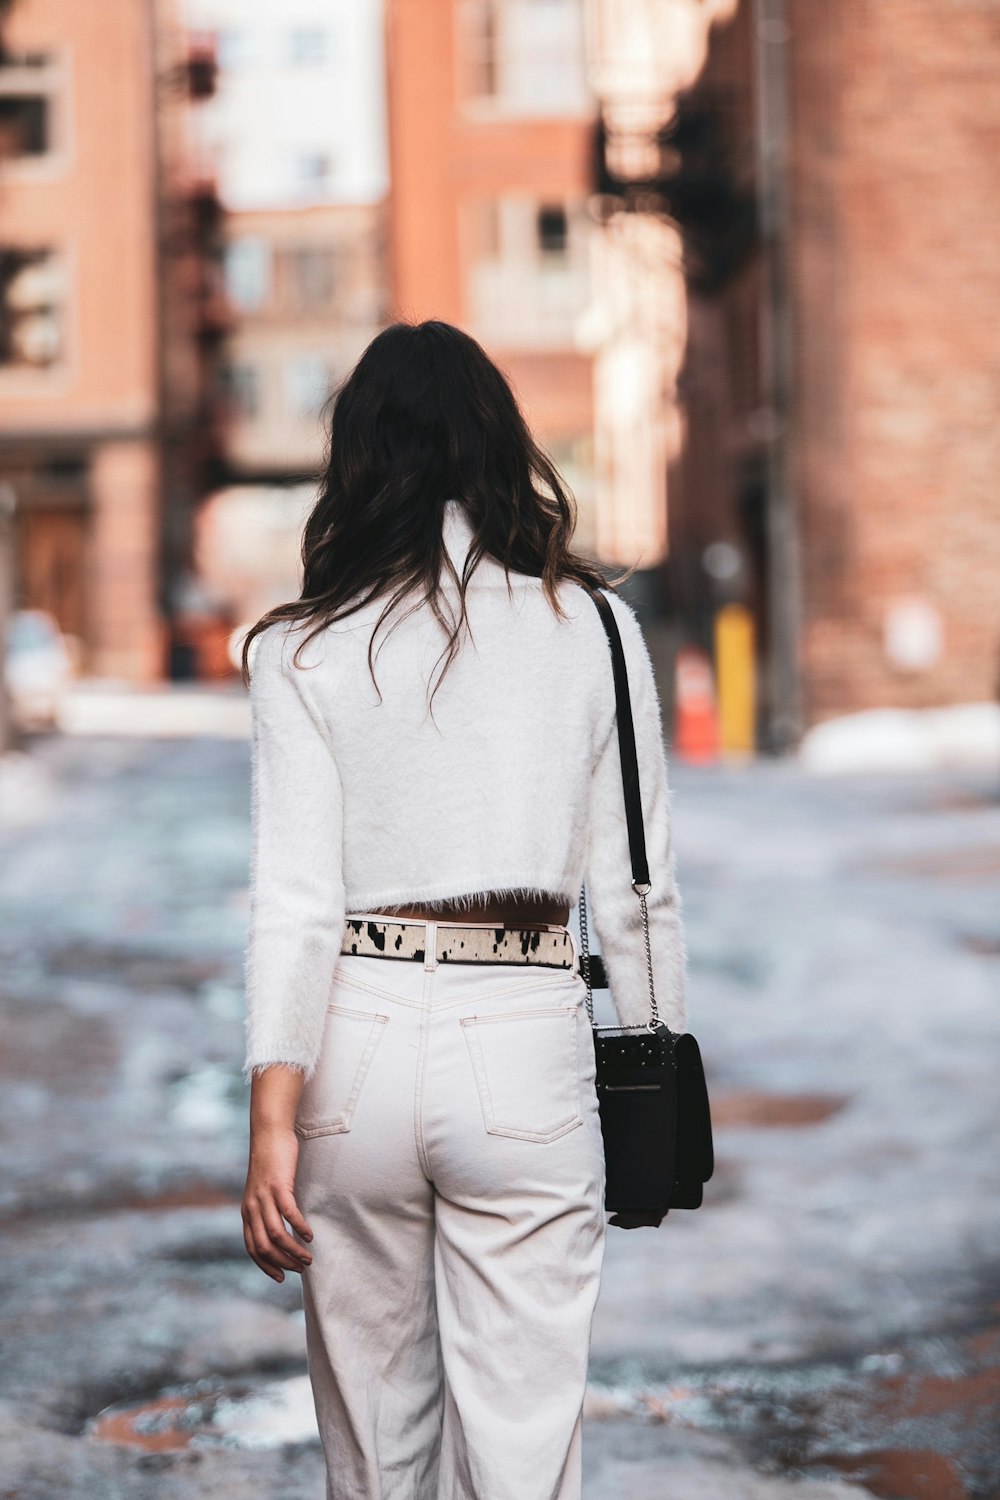 woman in white long sleeve shirt and gray pants walking on street during daytime